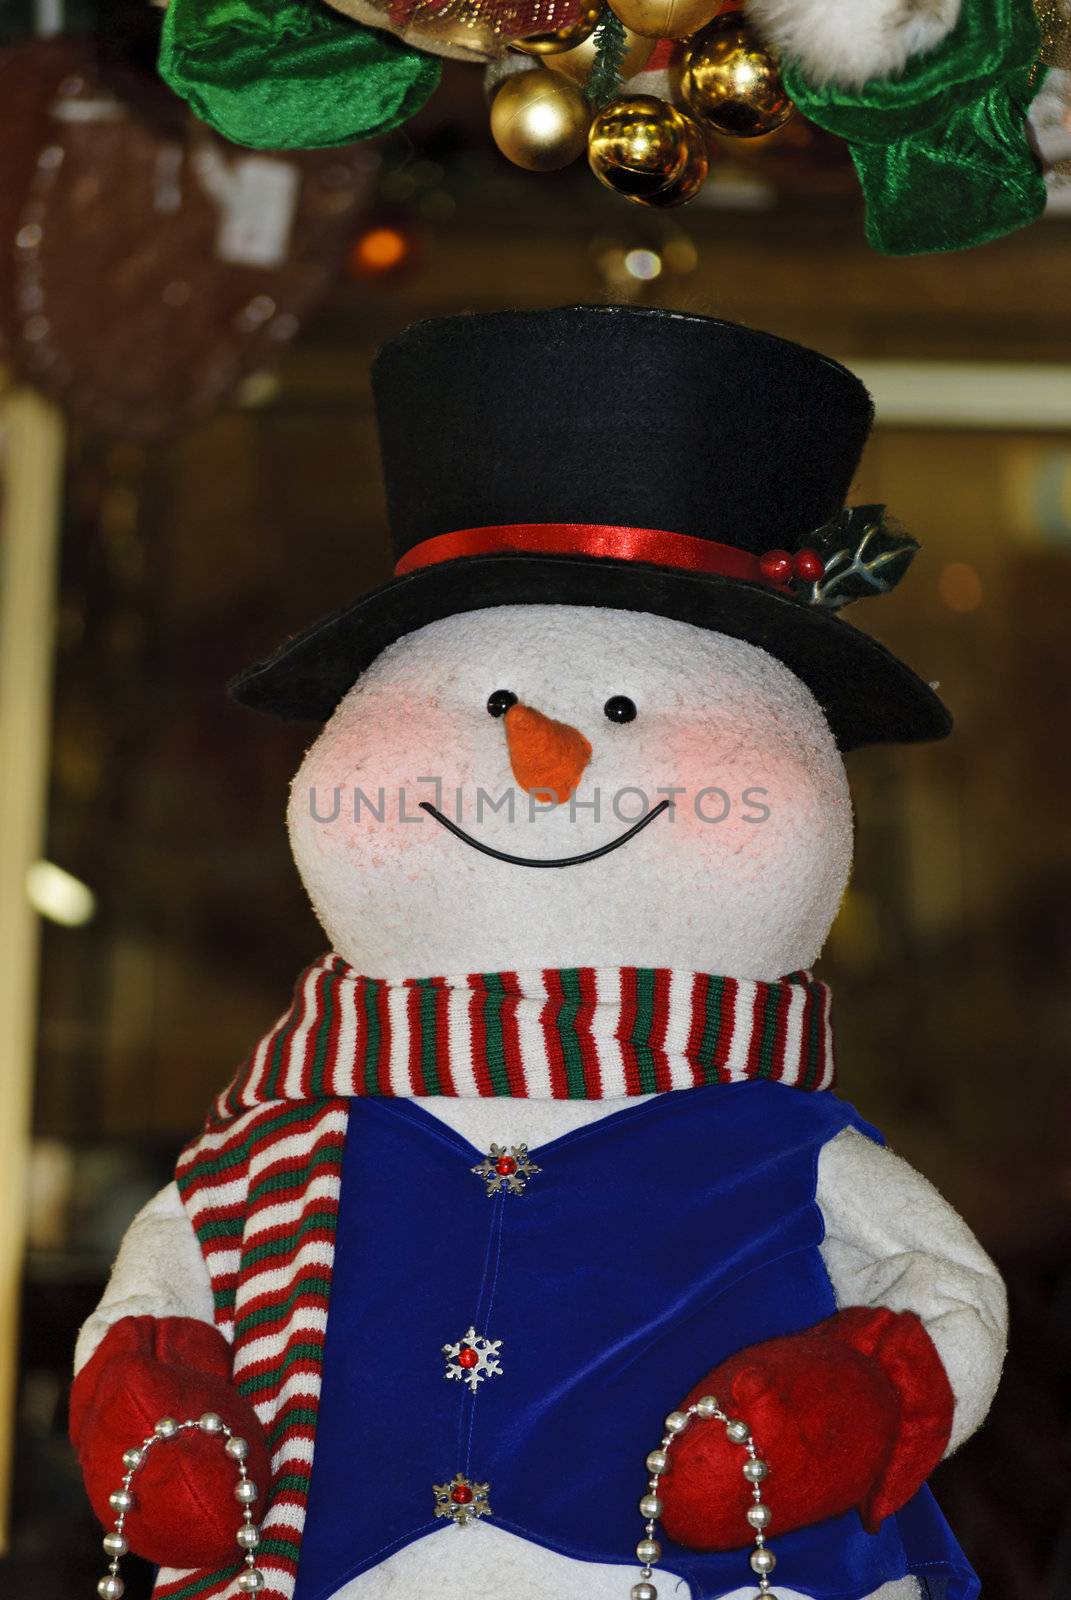 Snowman at Christmas market in Germany